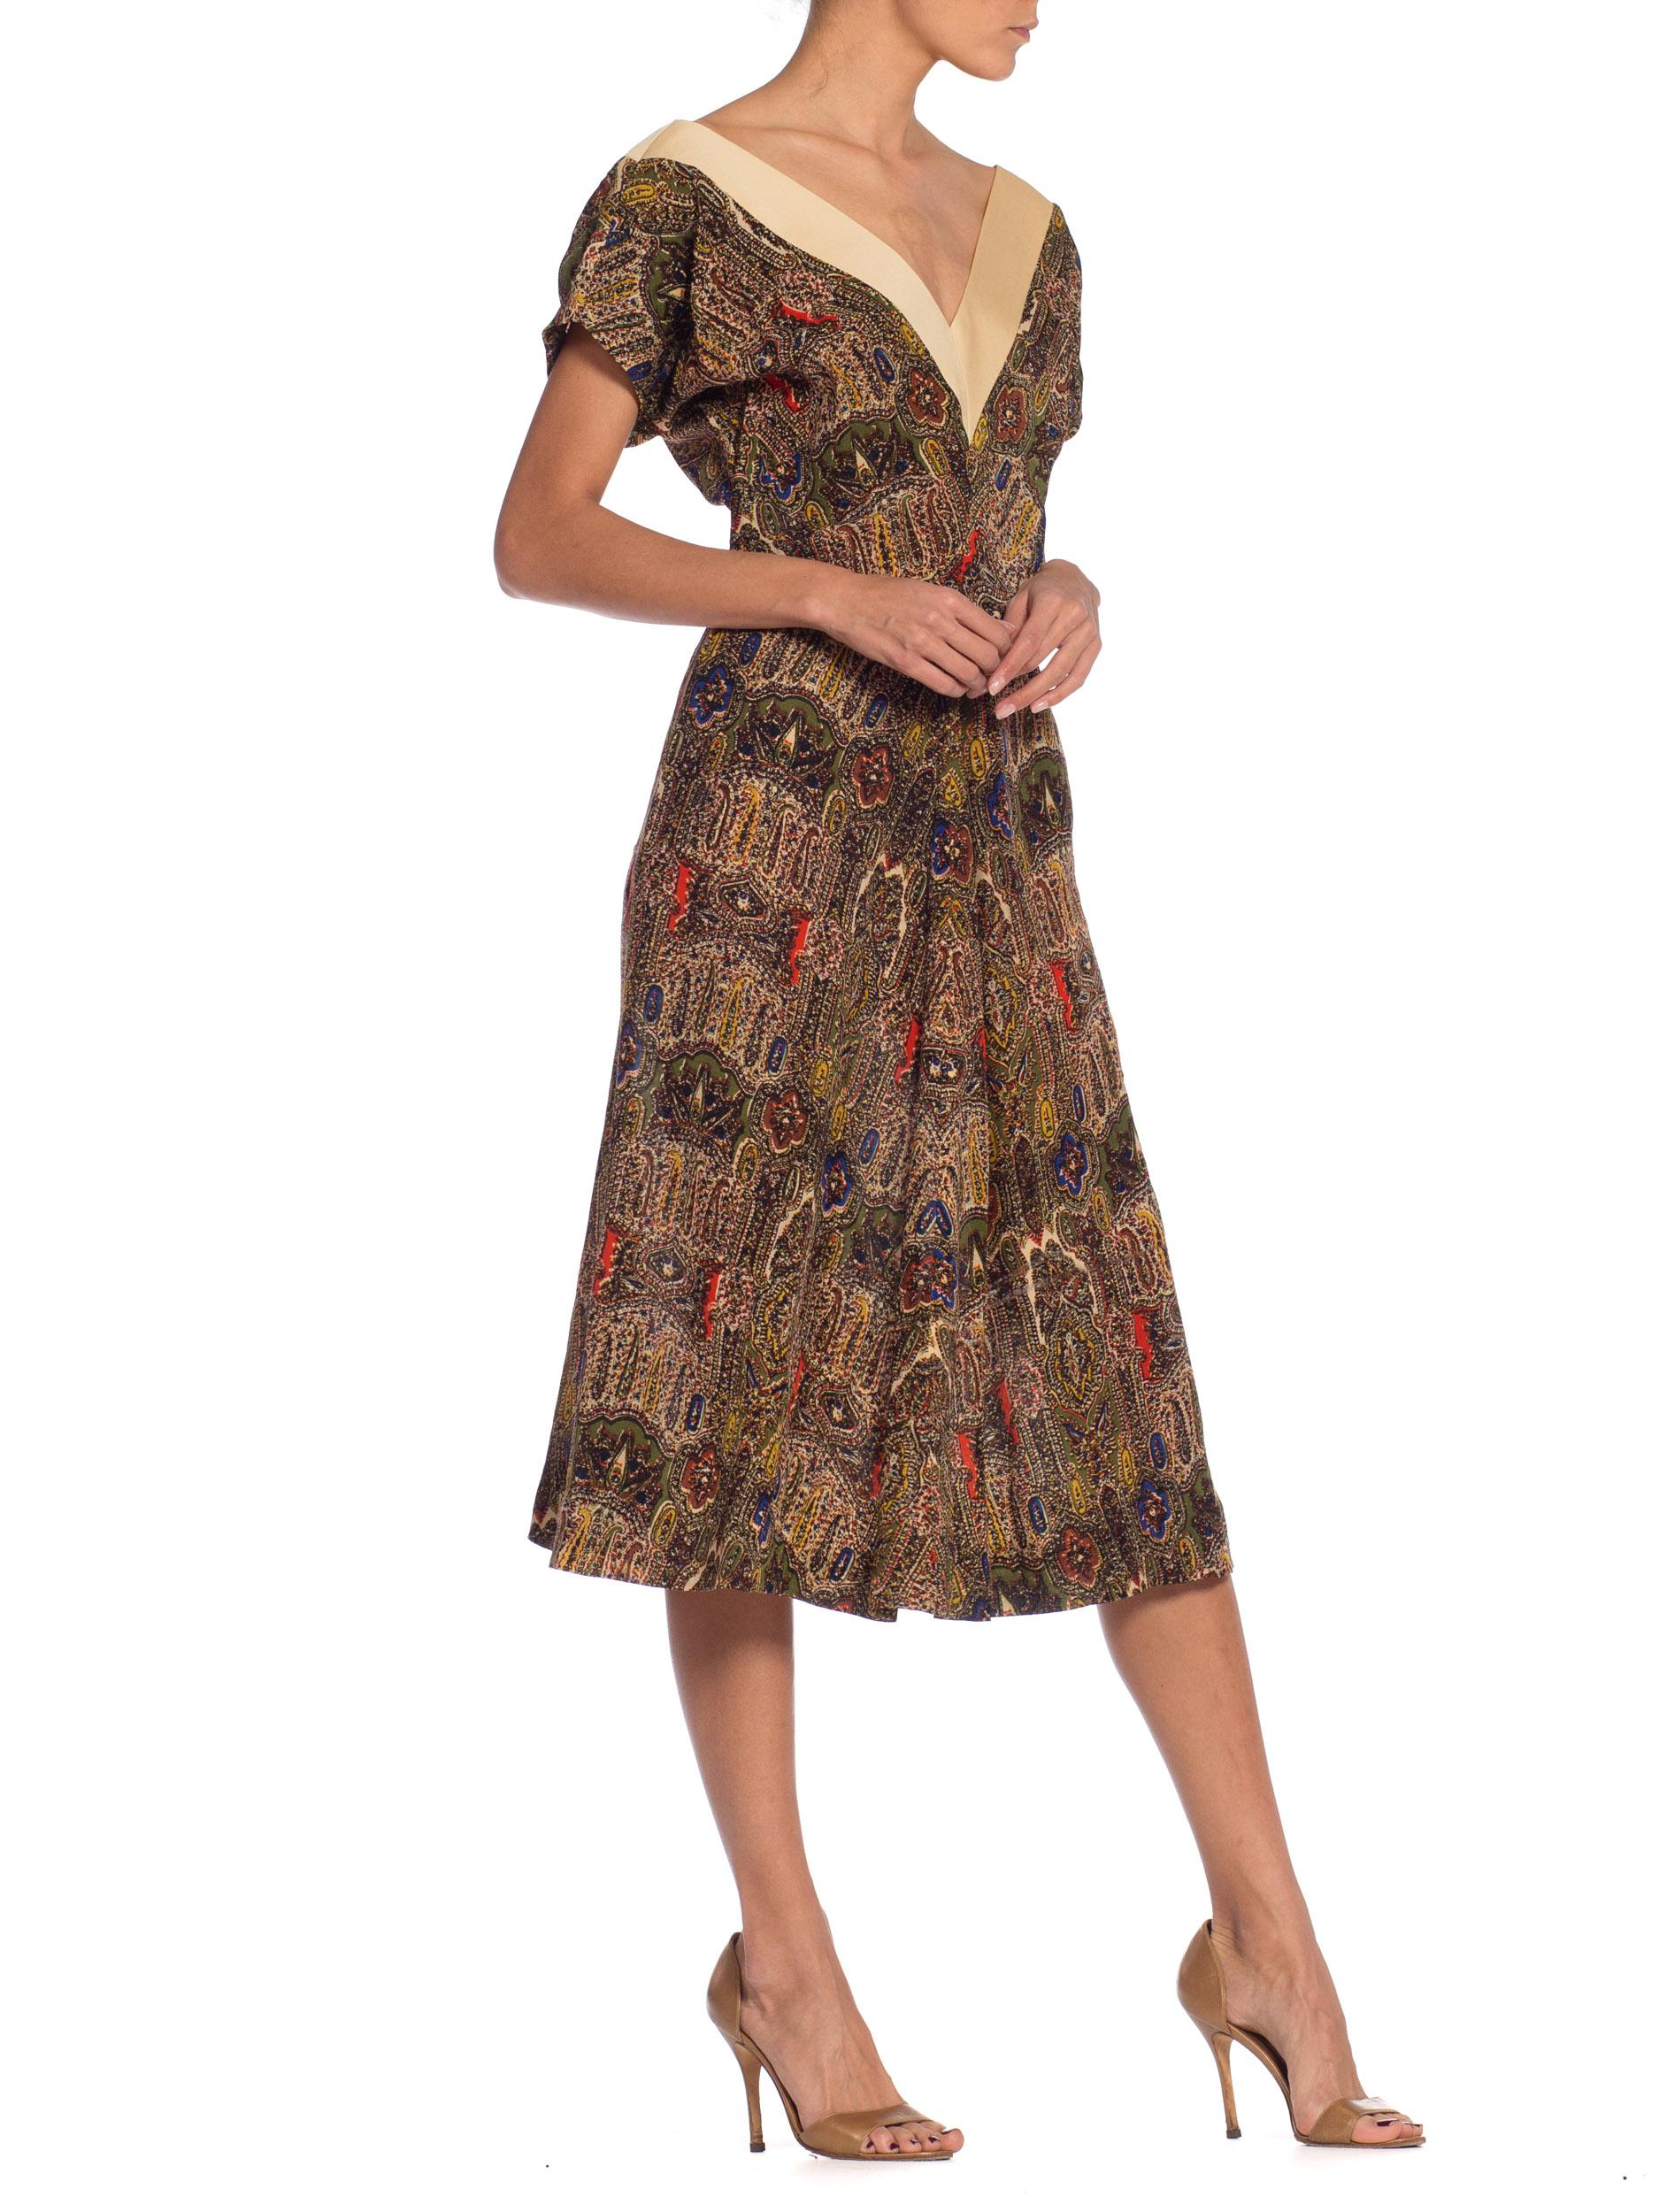 1950S CLAIRE MC CARDELL Multicolor Paisley Wool Day Dress 2